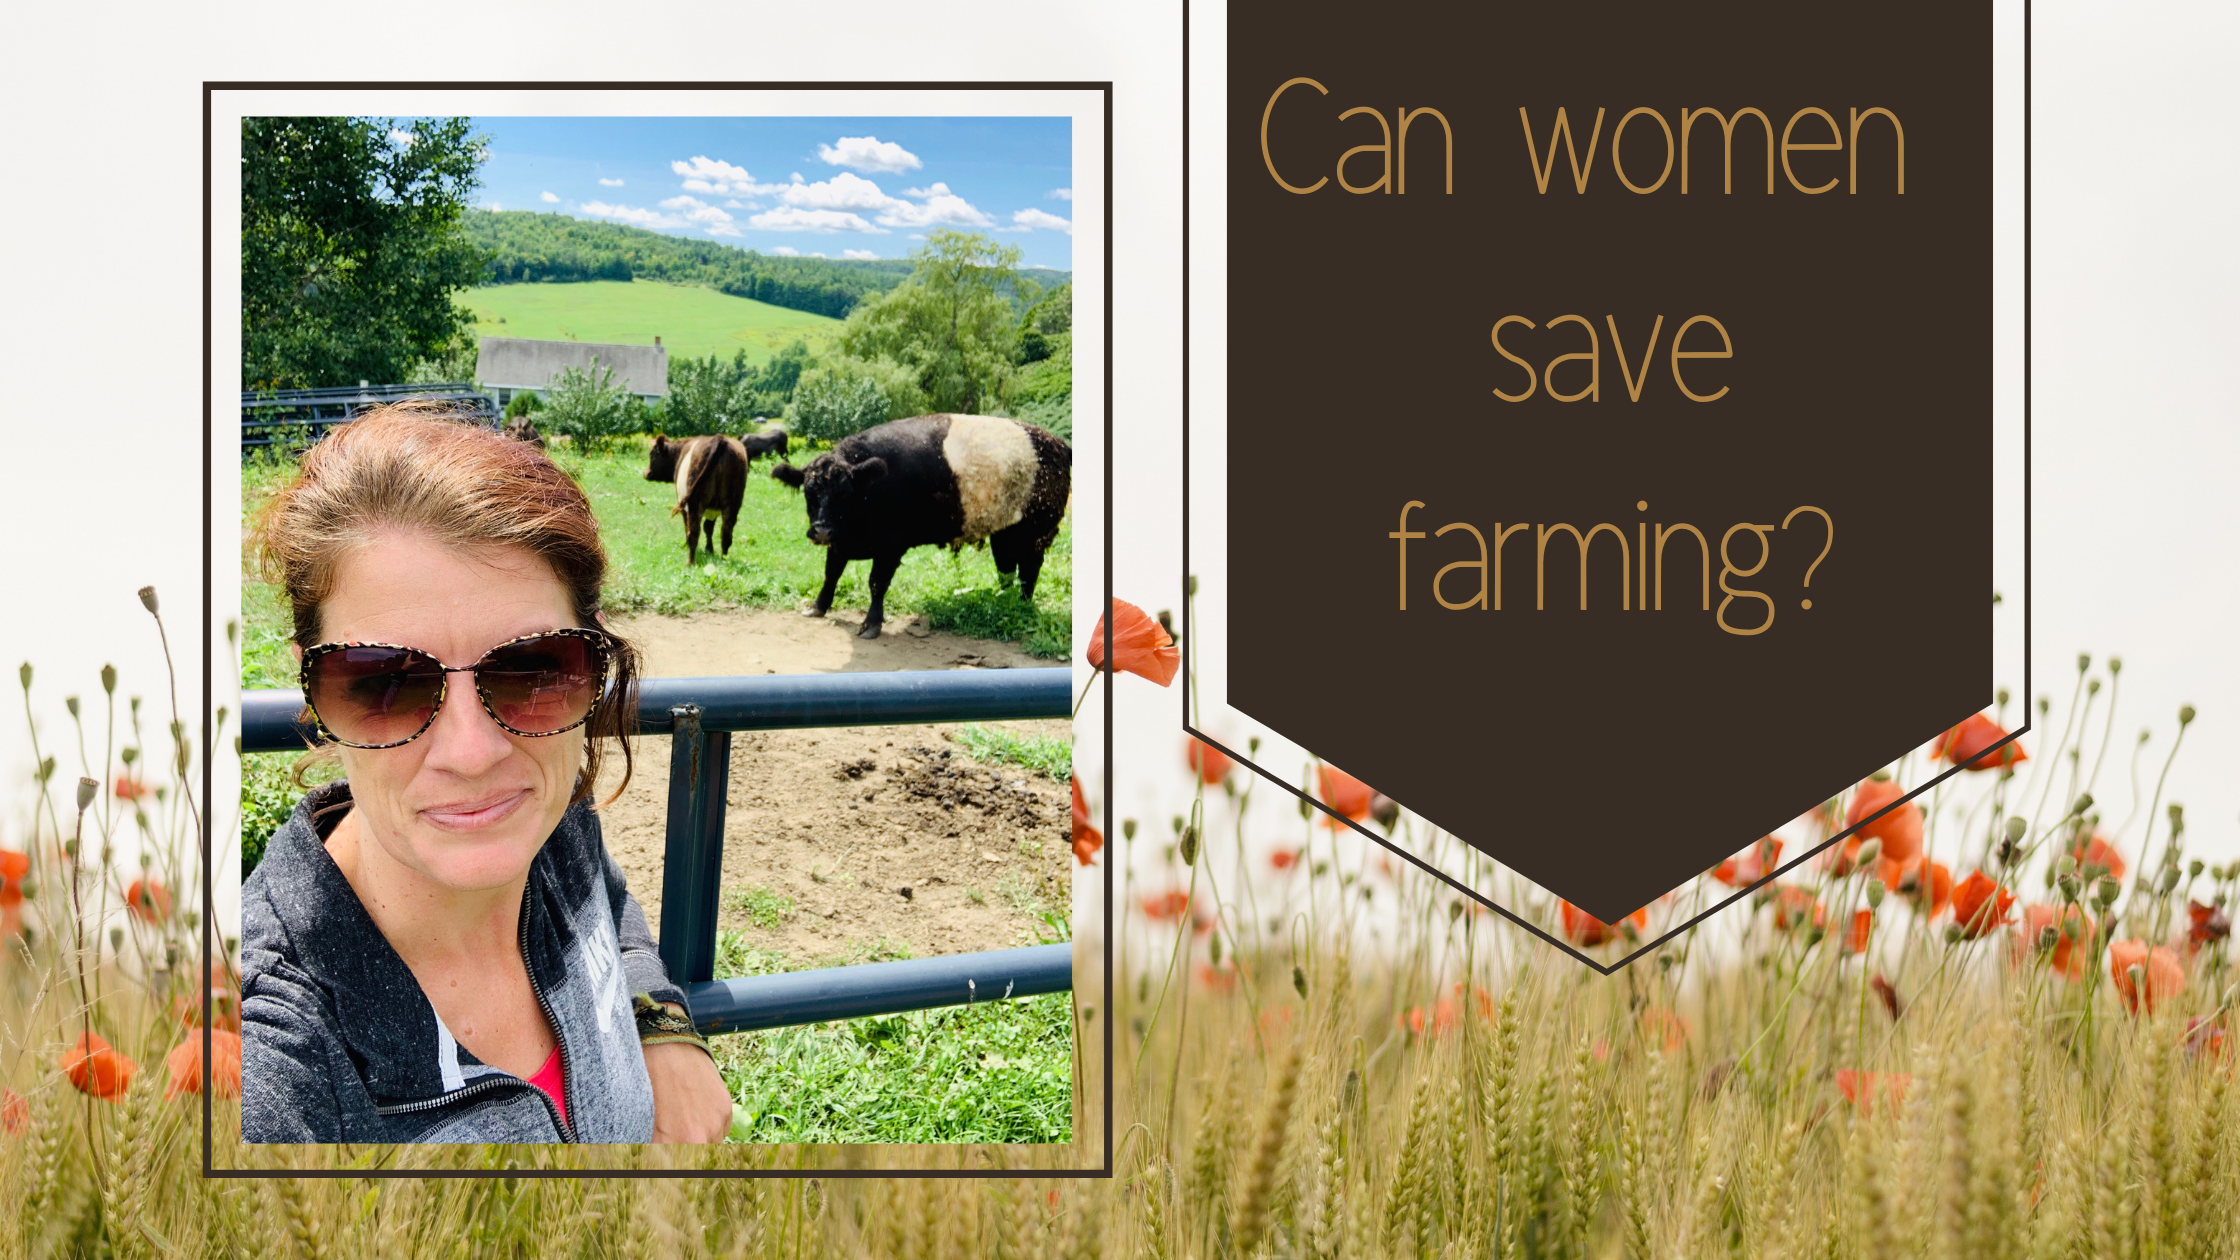 Woman-Owned Farms can they Save Farming?